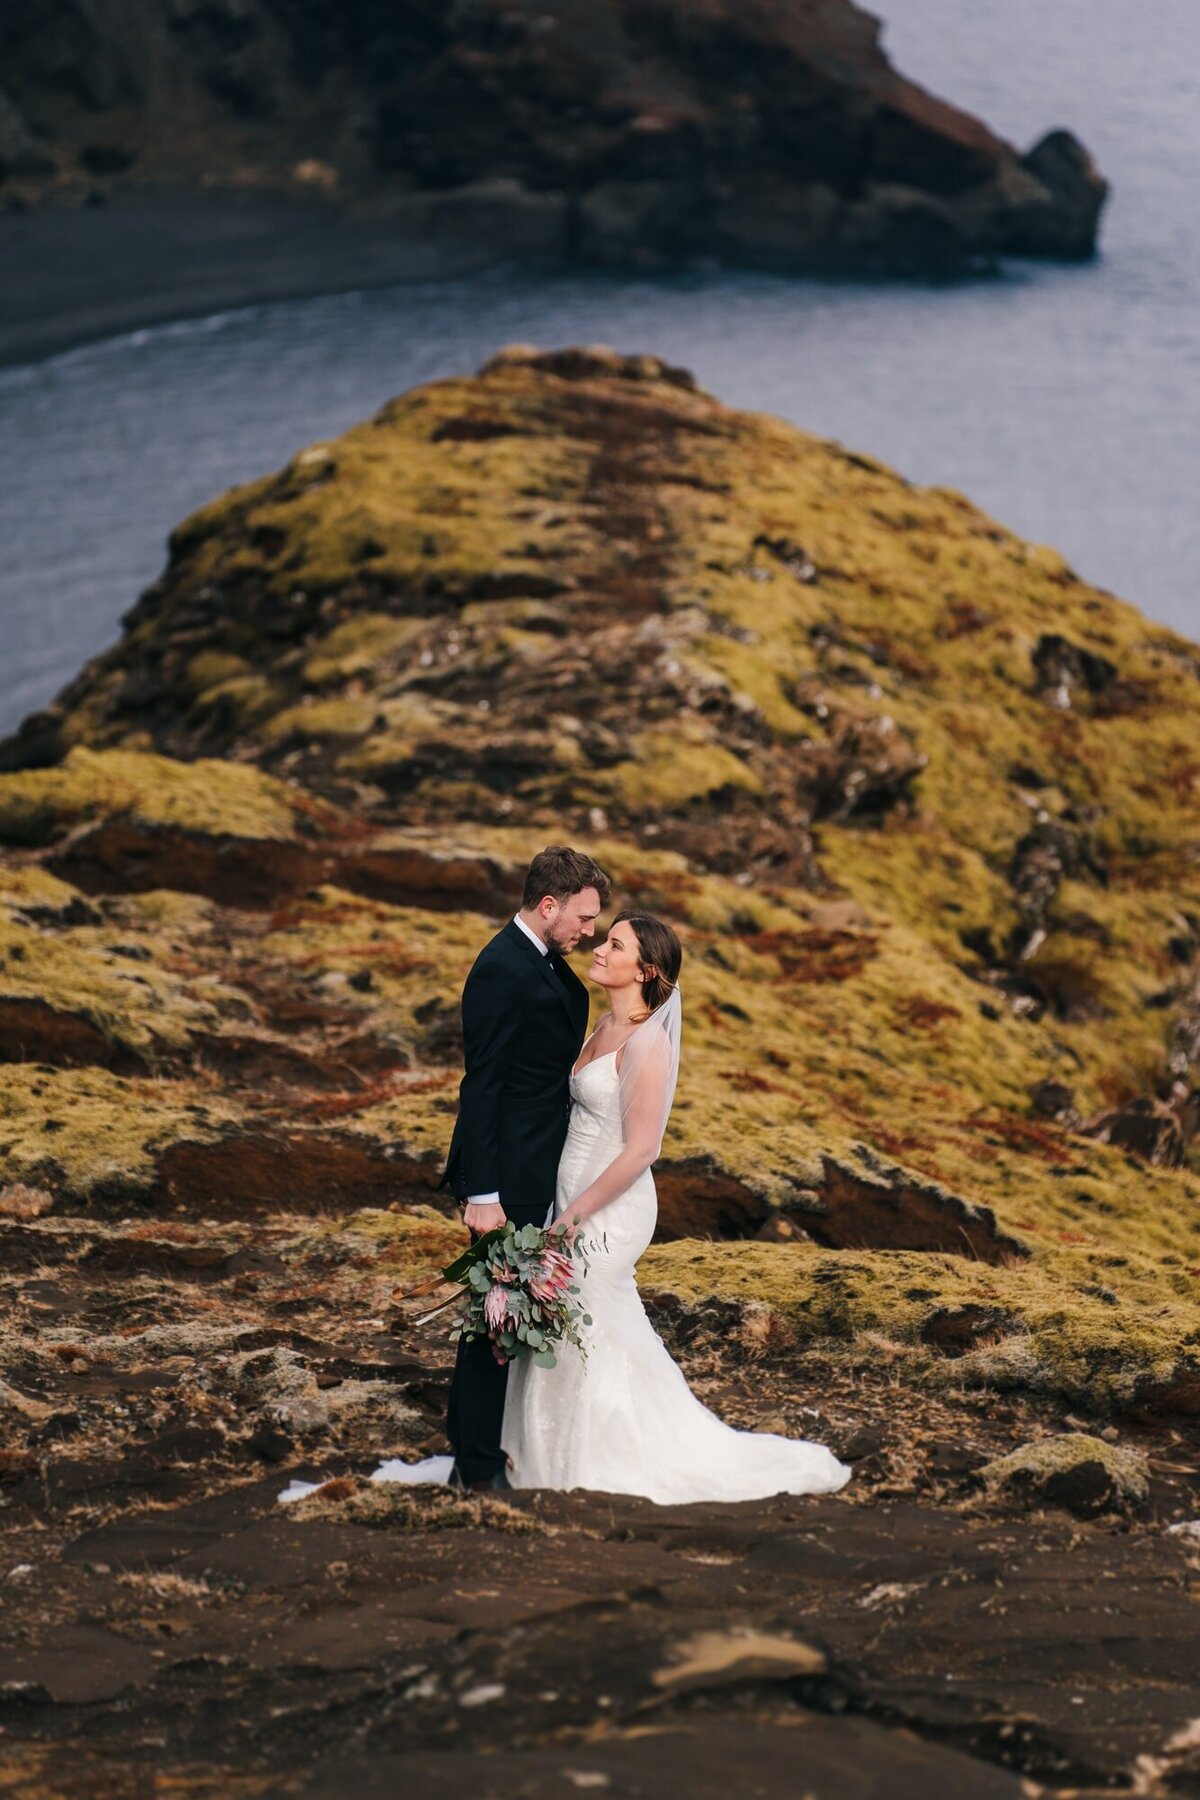 Face to face, this couple shares a mesmerizing gaze against the stunning backdrop of the Icelandic coast, where love meets the endless horizon.